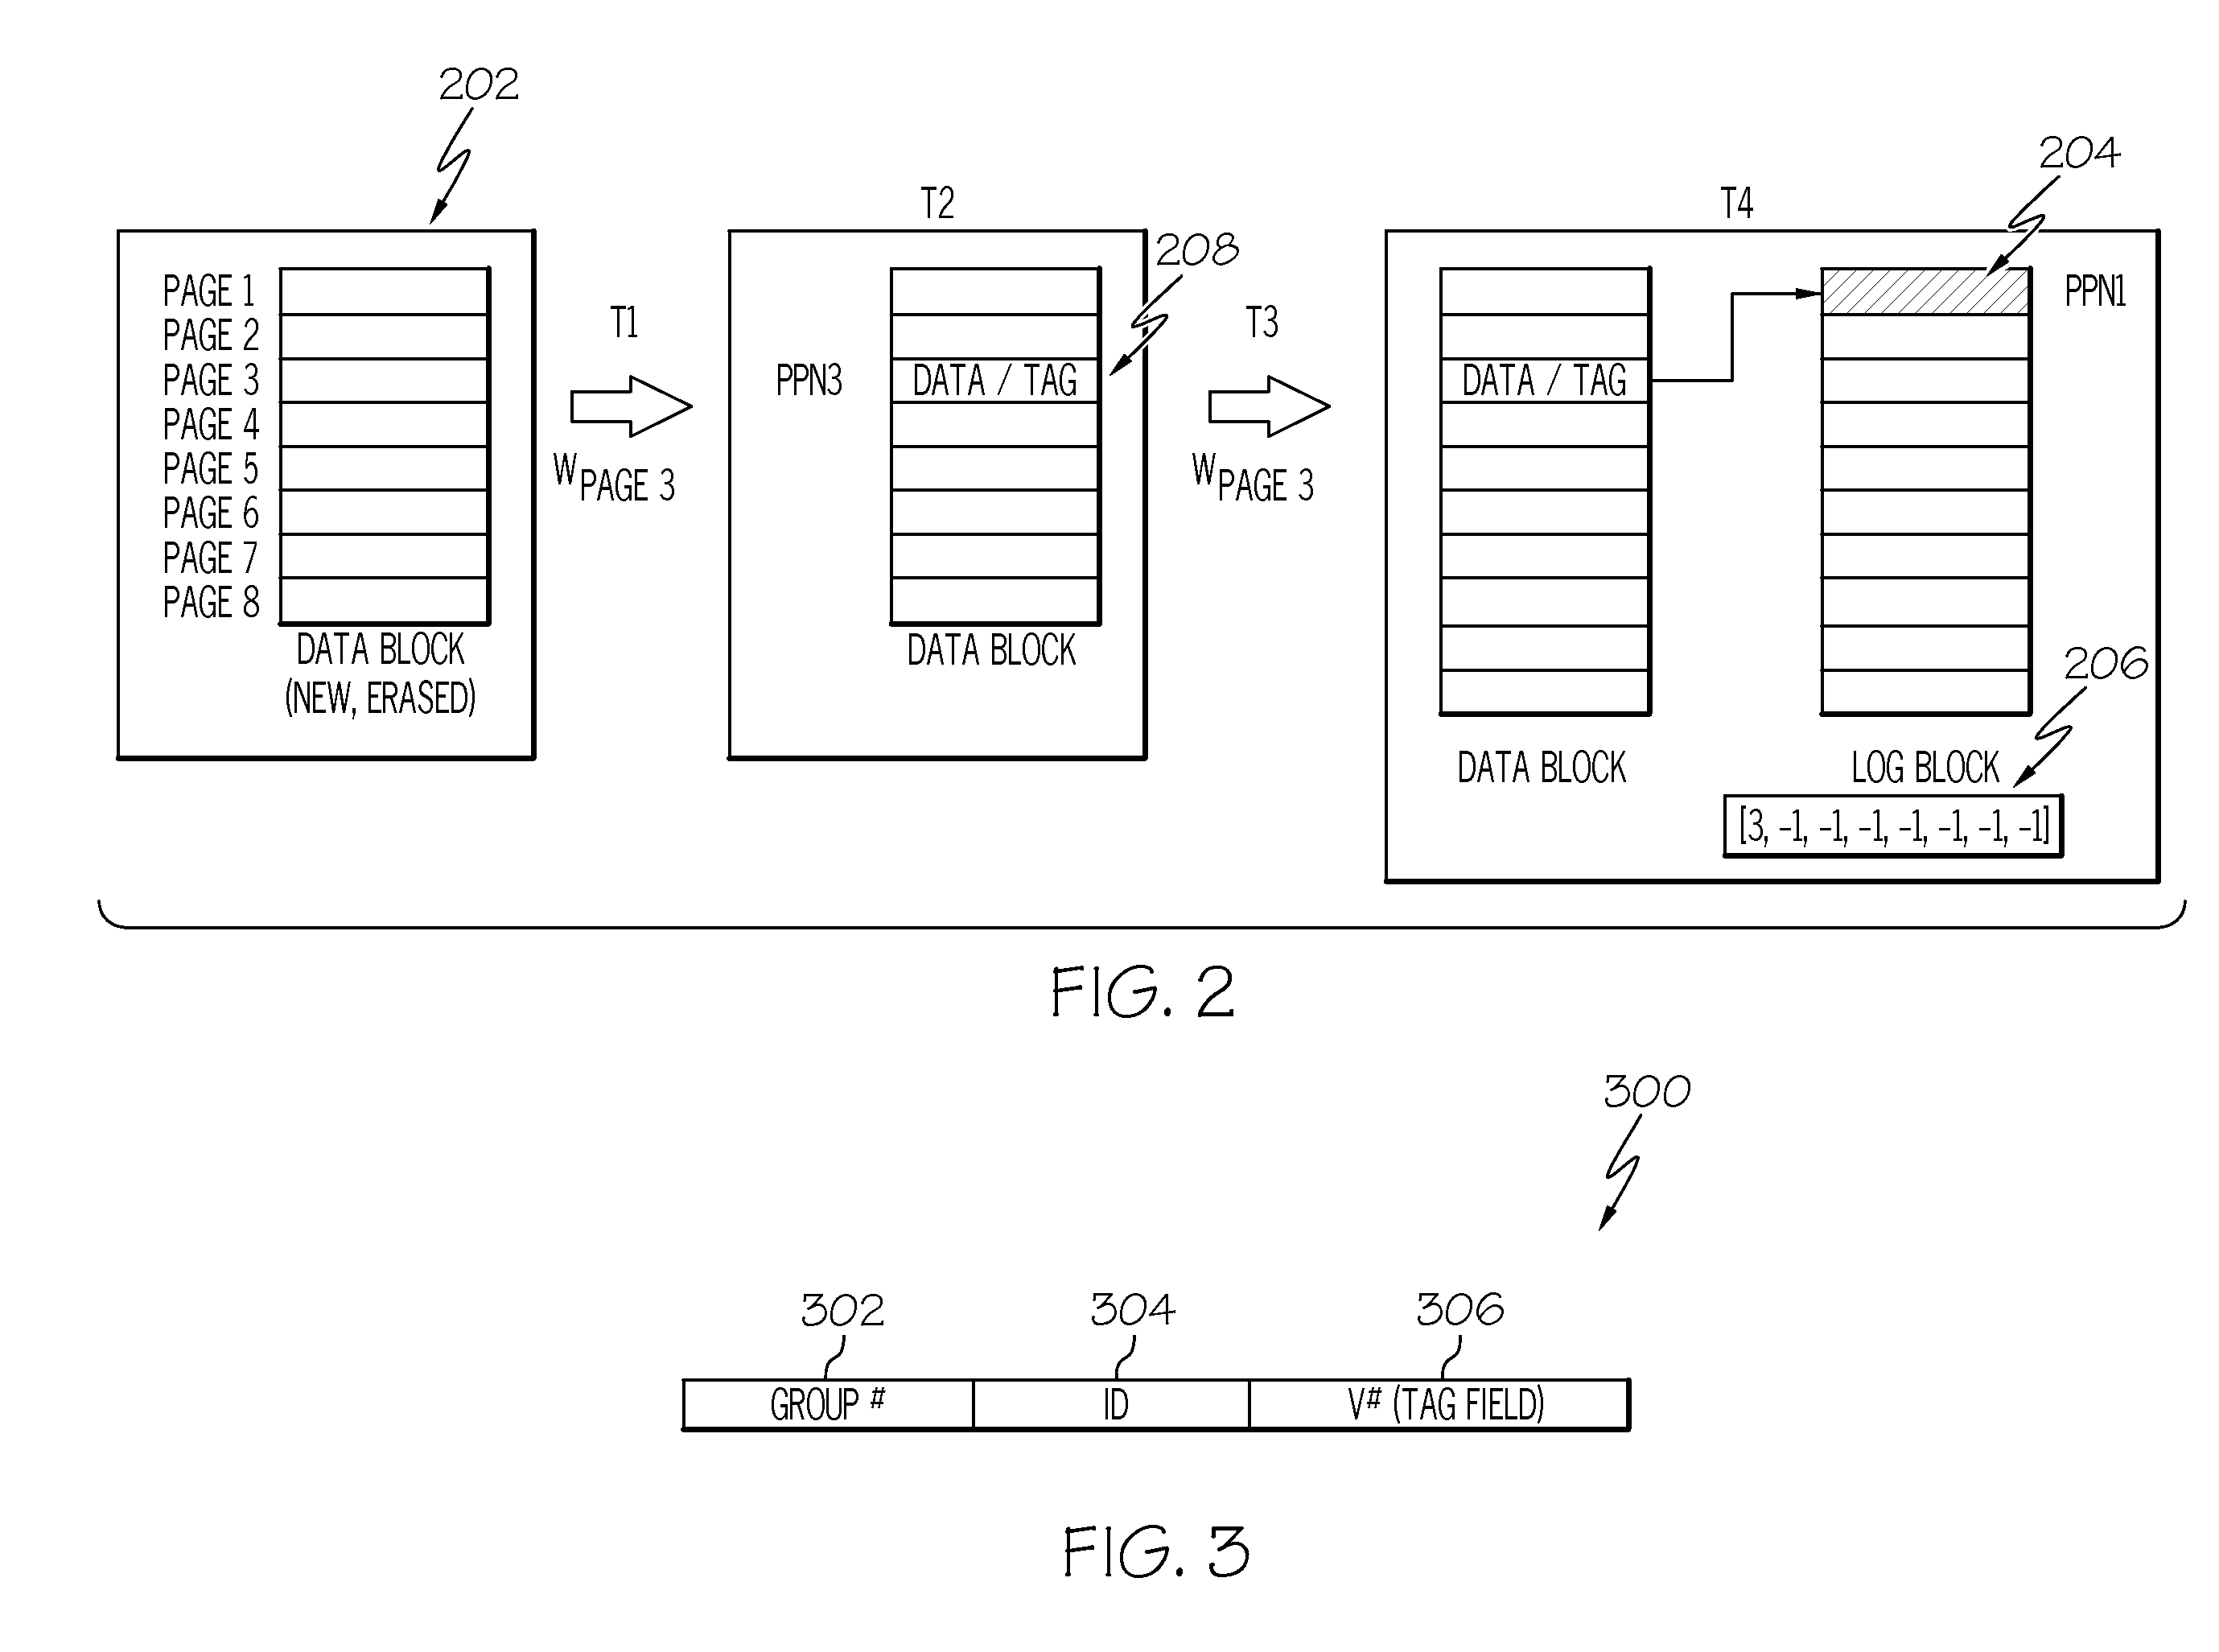 File system for maintaining data versions in solid state memory